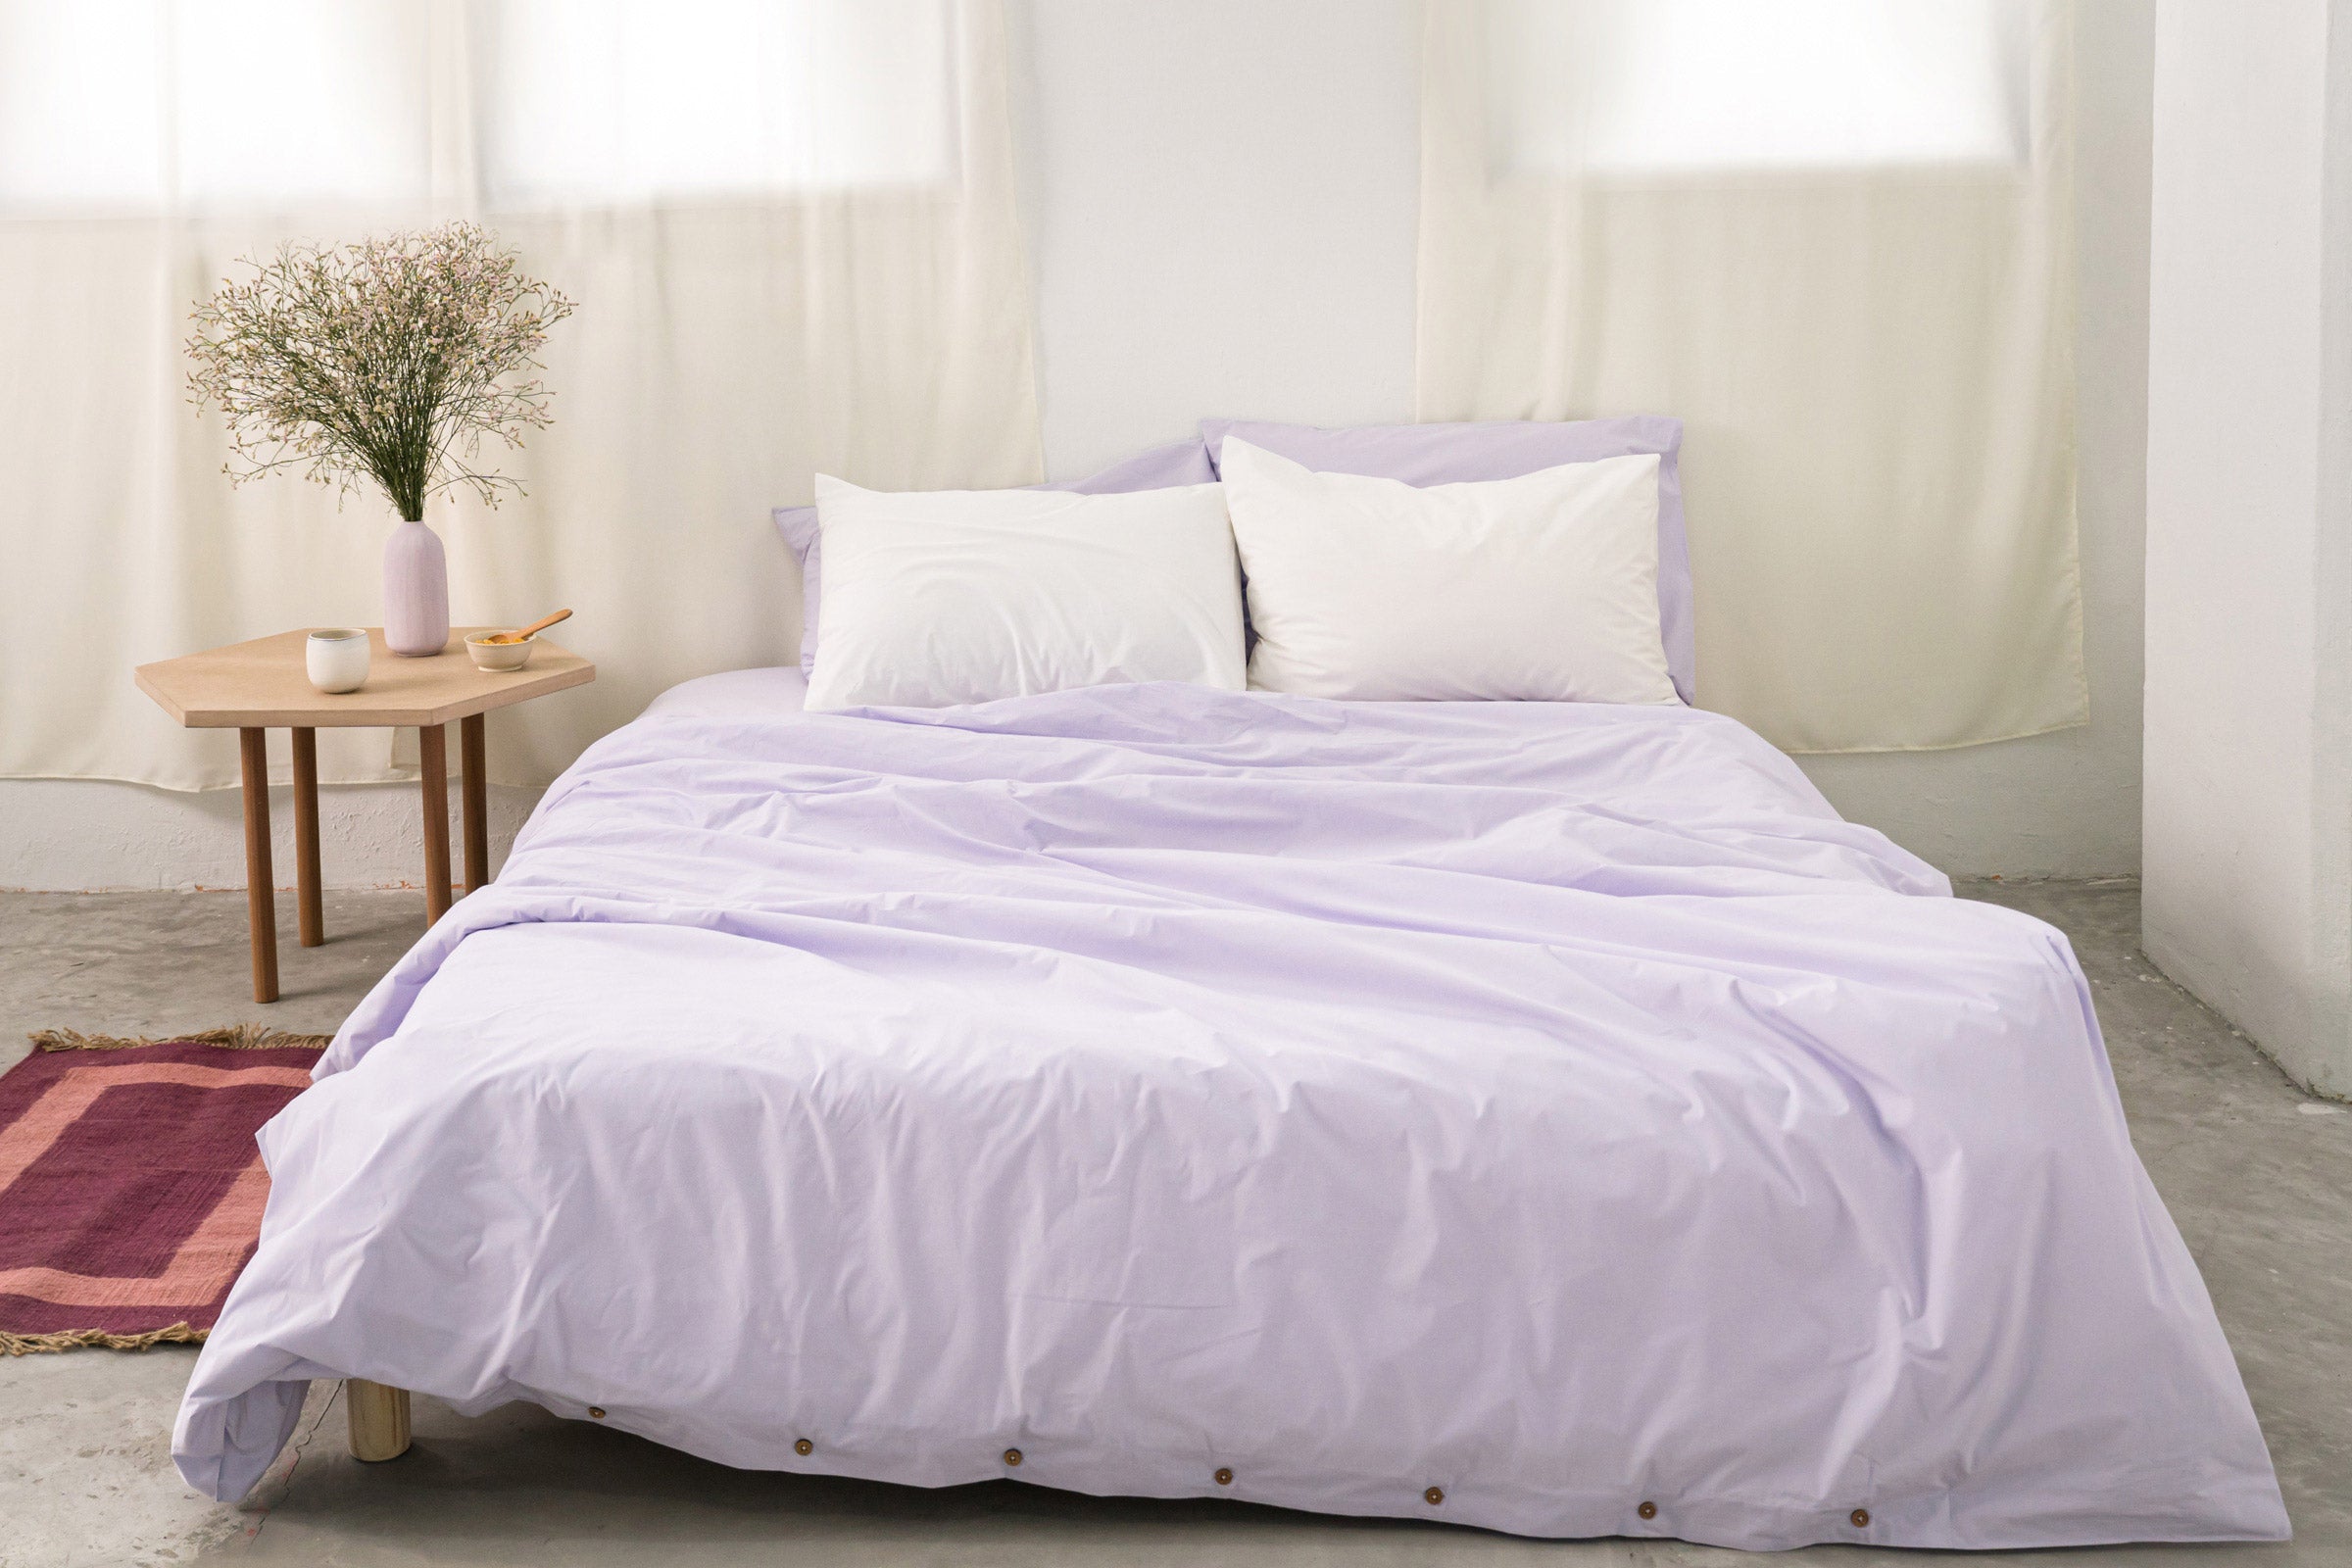 classic-lilac-duvet-cover-fitted-sheet-pillowcase-pair-white-pillowcase-pair-front-view-by-sojao.jpg